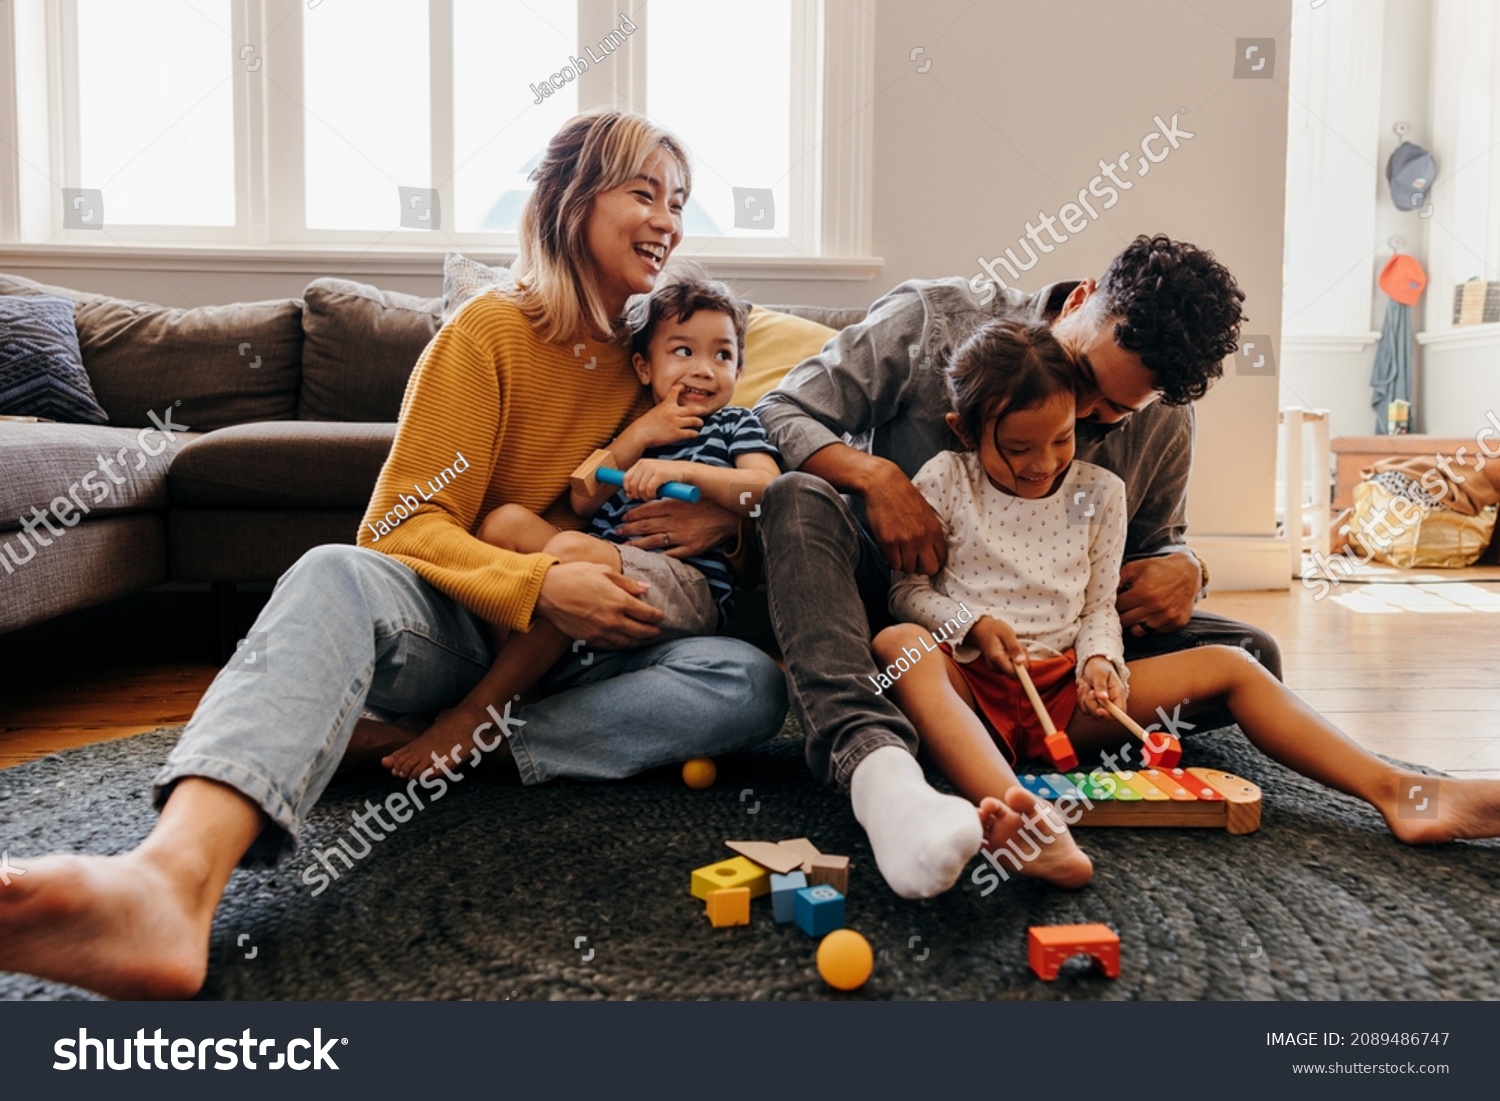 Young parents playing with their son and daughter in the living room. Mom and dad having fun with their children during playtime. Family of four spending some quality time together at home. #2089486747